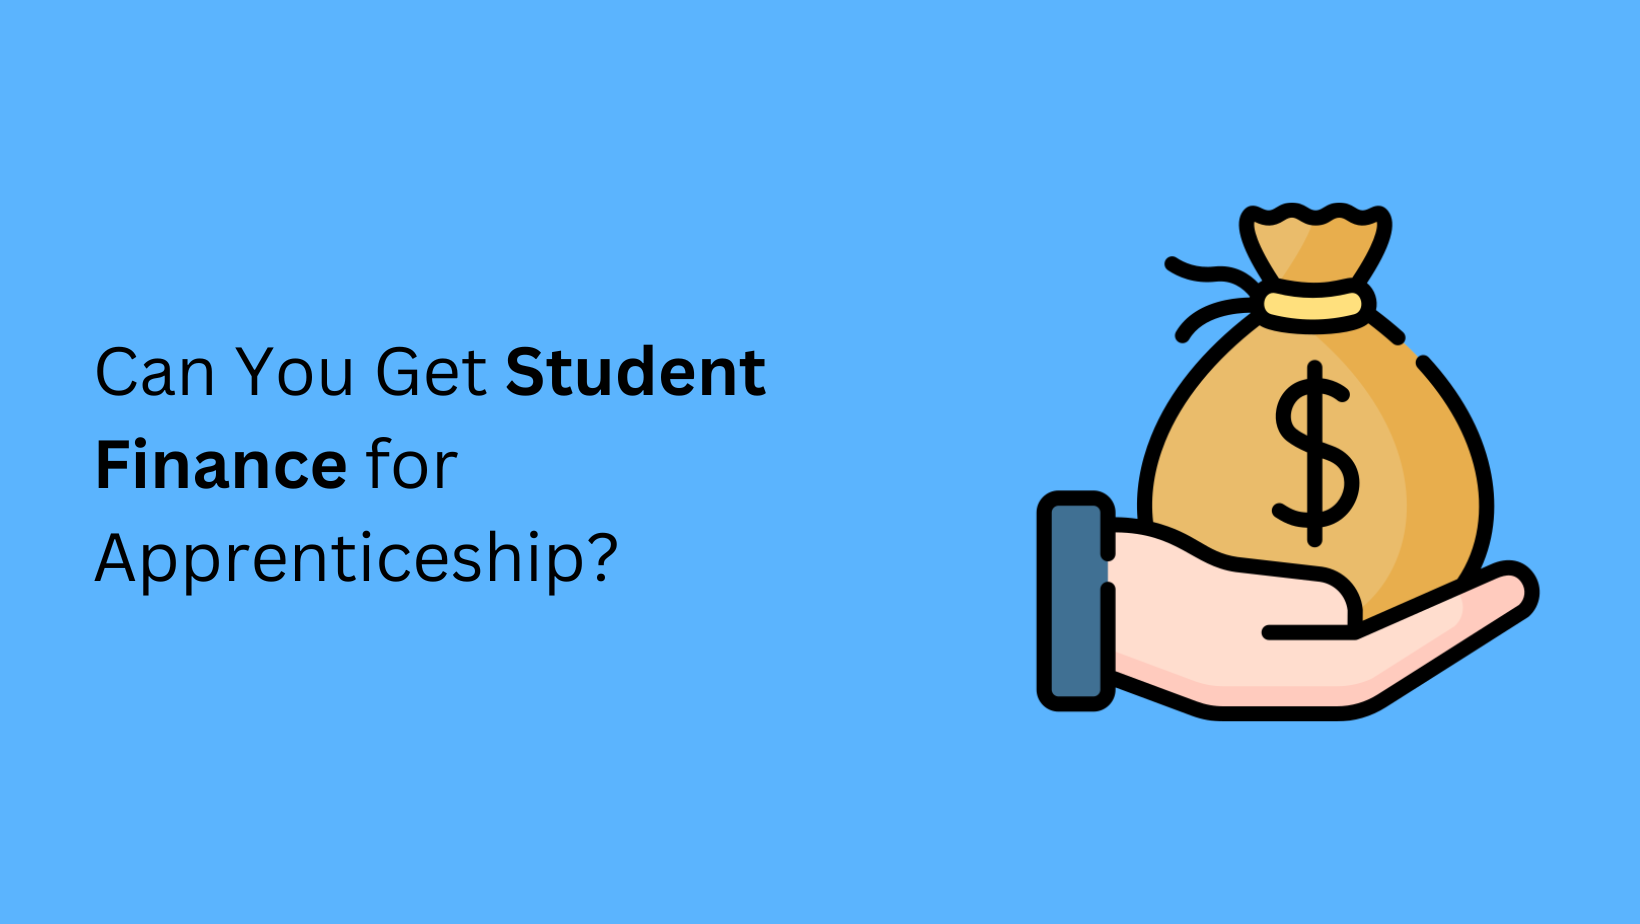 Can You Get Student Finance for Apprenticeship